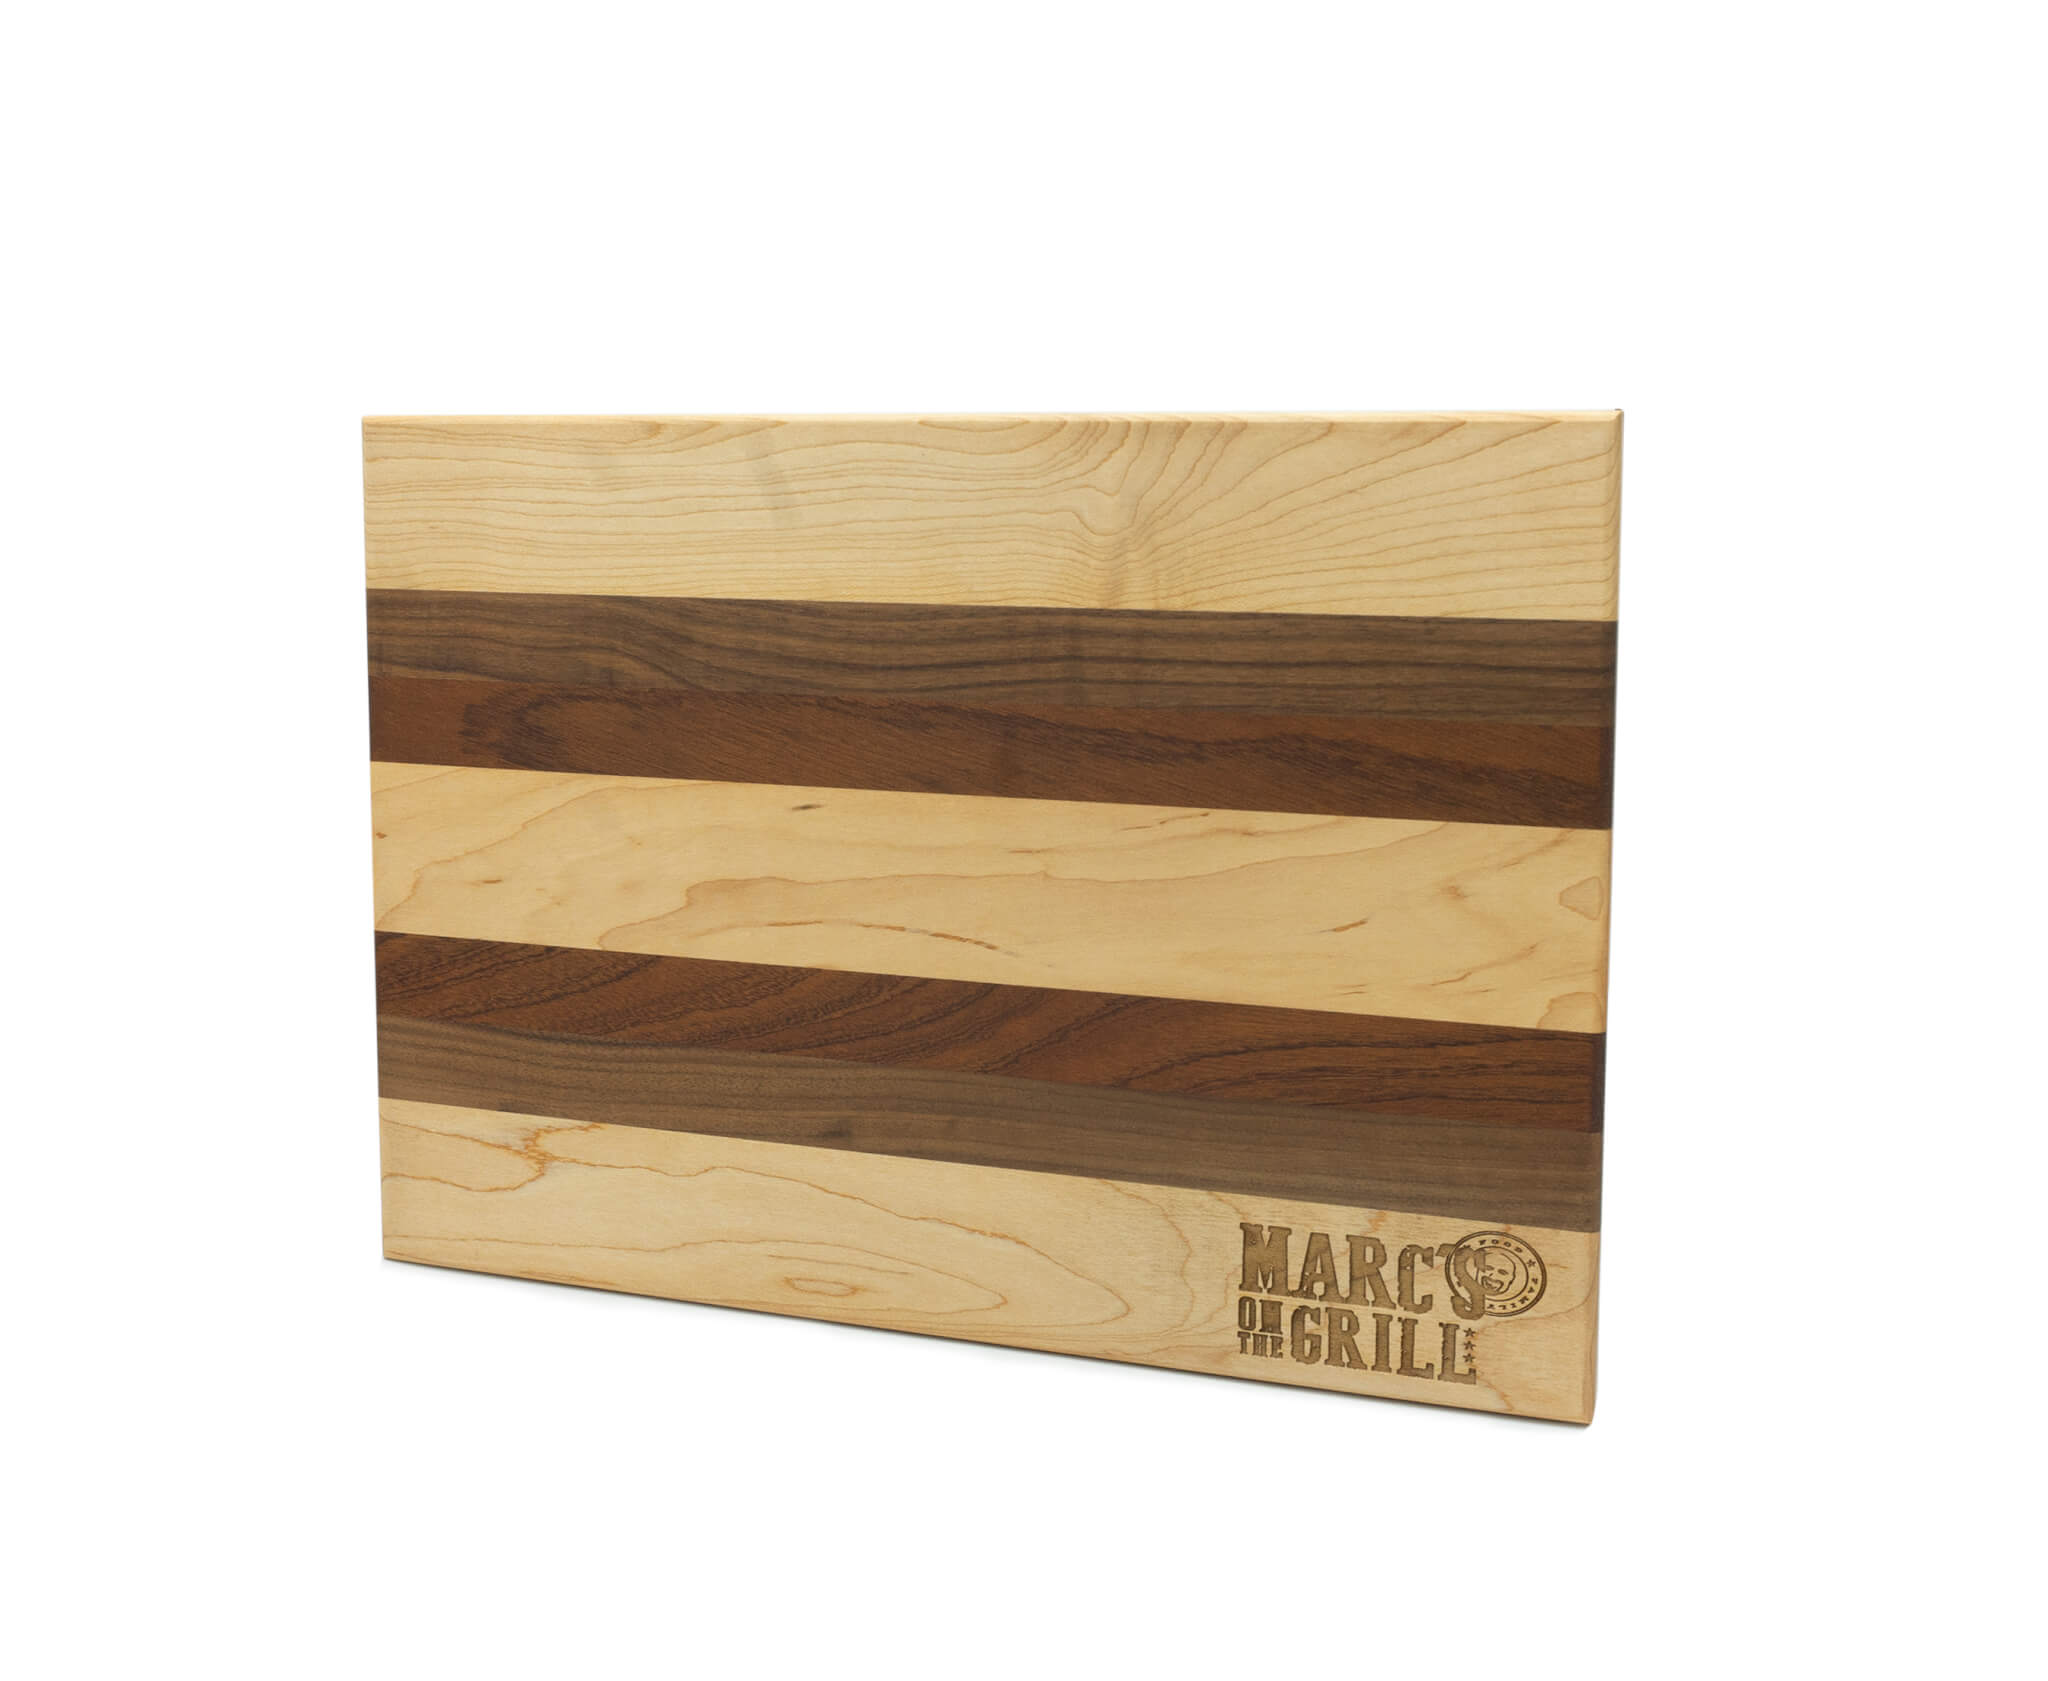 MOTG-SL581017 (Cutting Boards 5-8 x 10 x 14 with Marc's on the Grill logo)